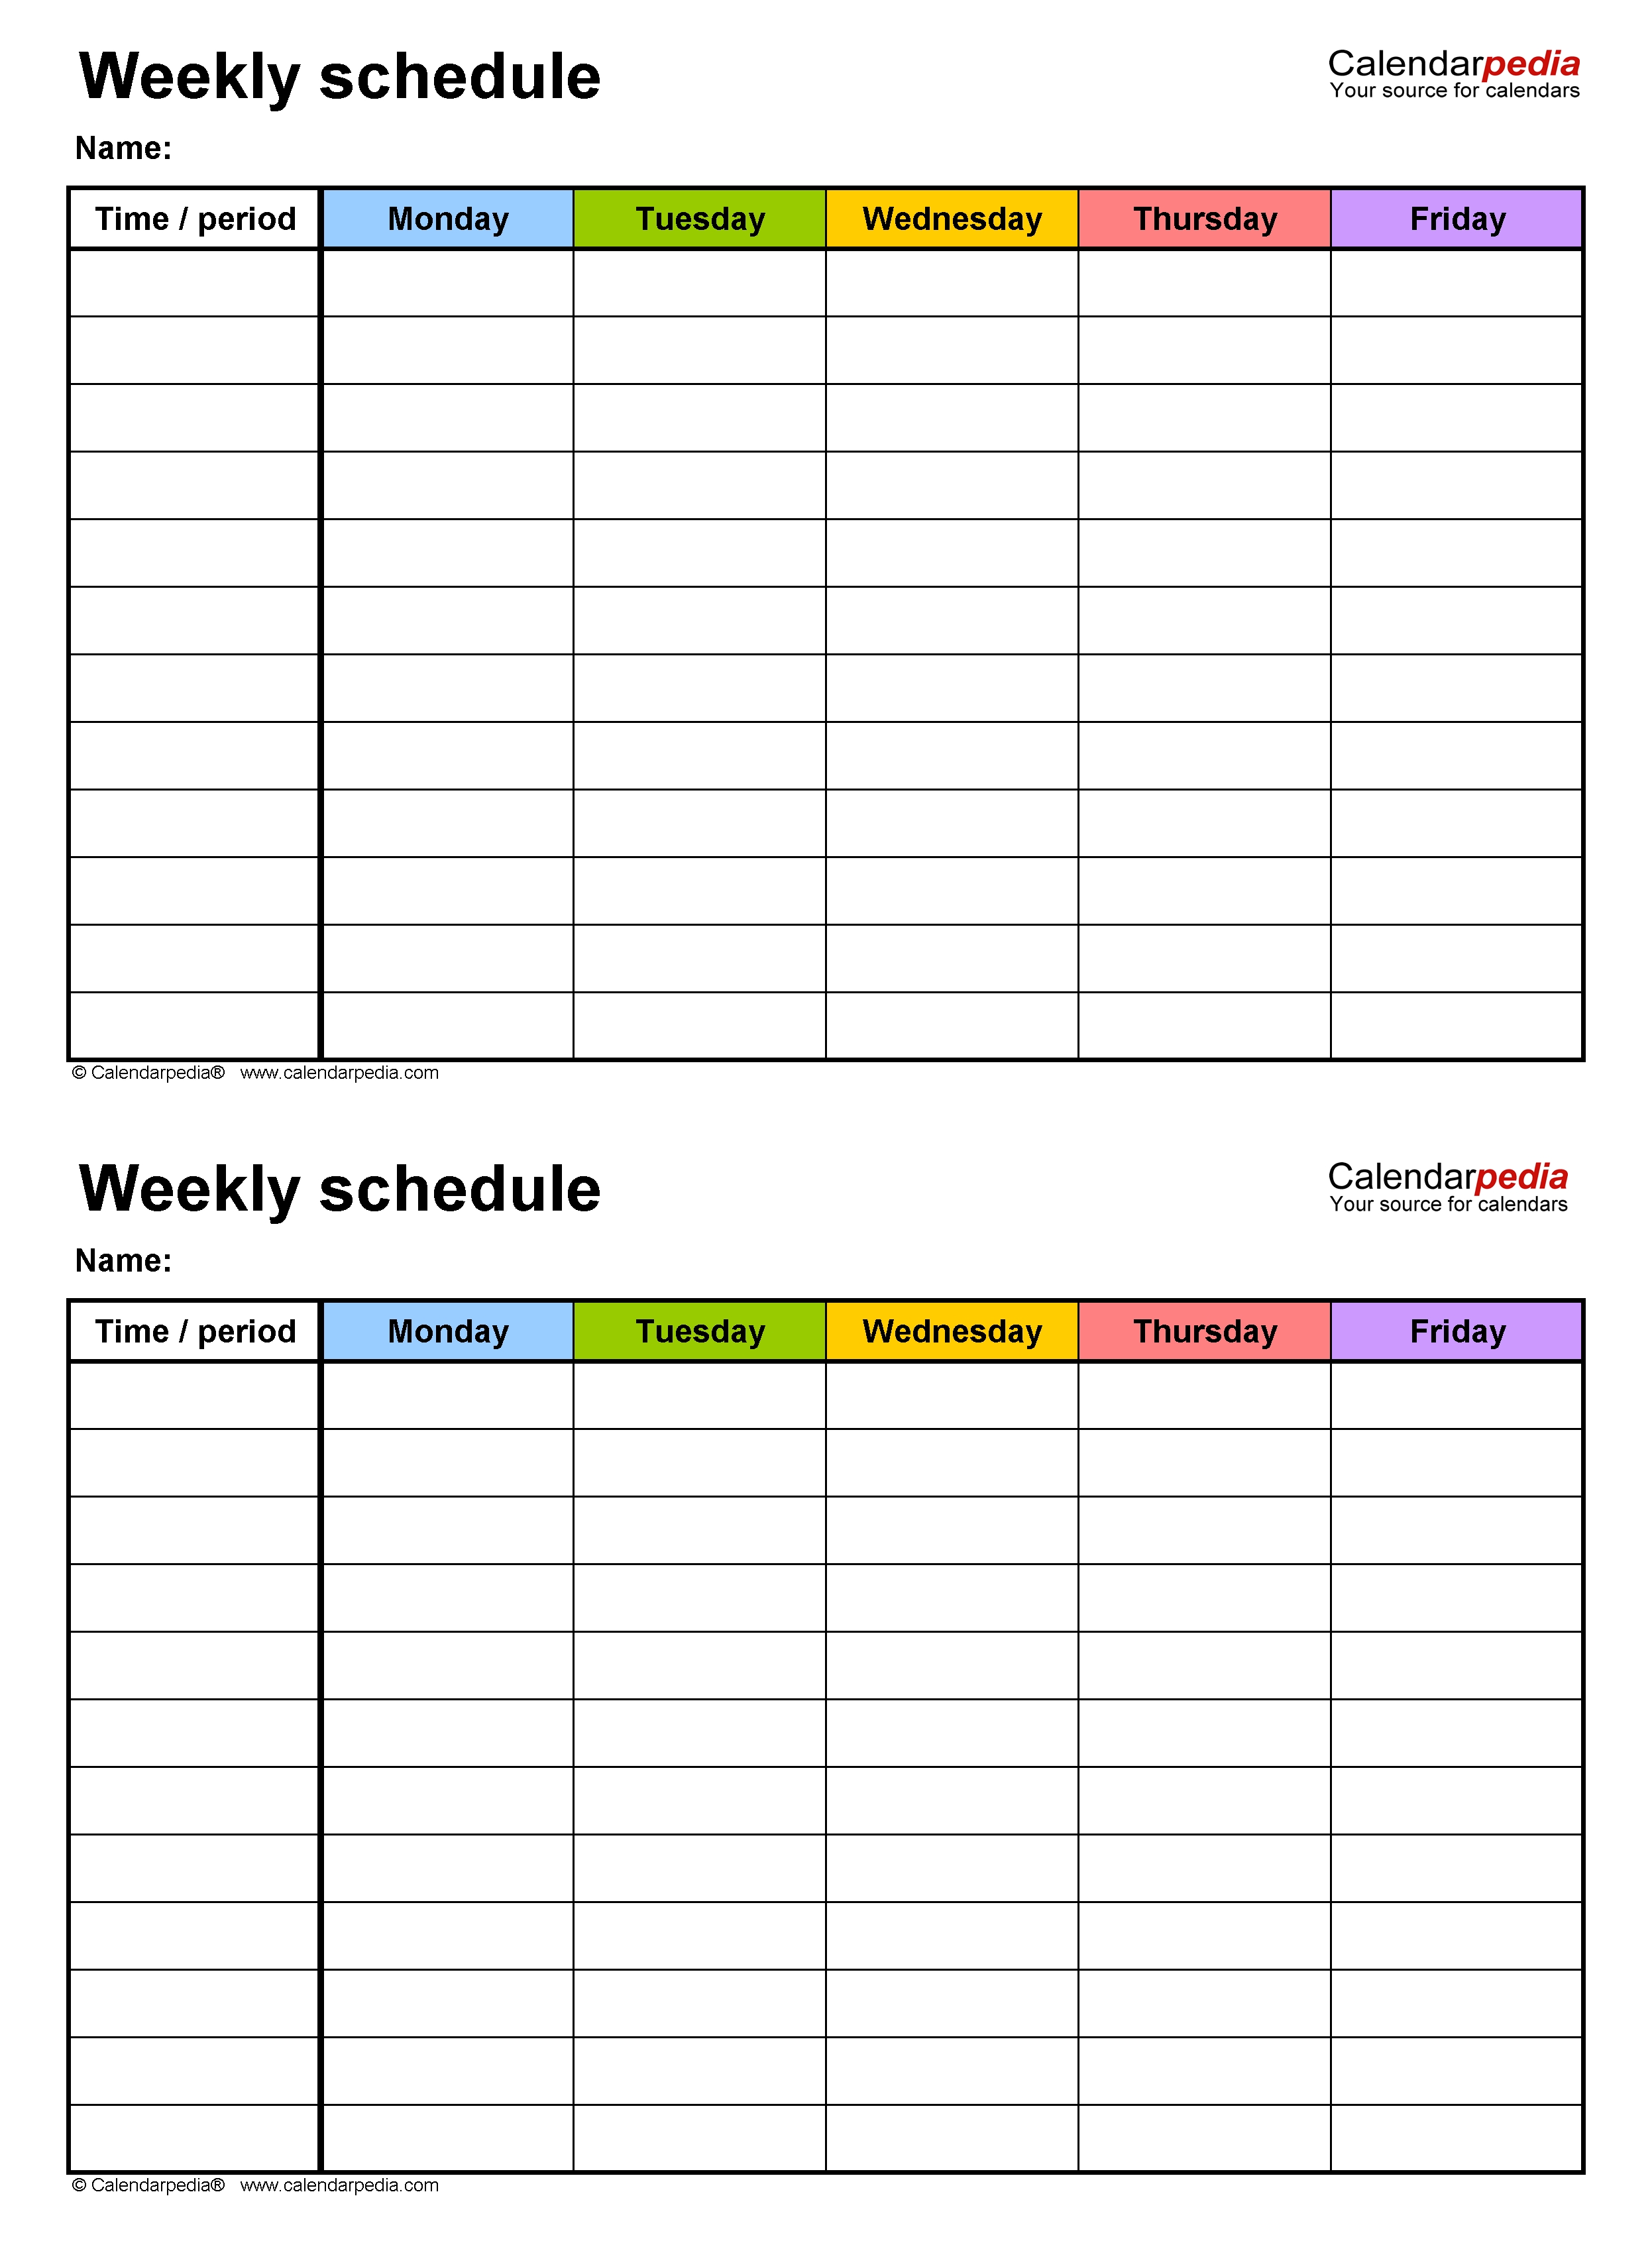 Free Weekly Schedule Templates For Word - 18 Templates-Monday To Friday Timetable Template